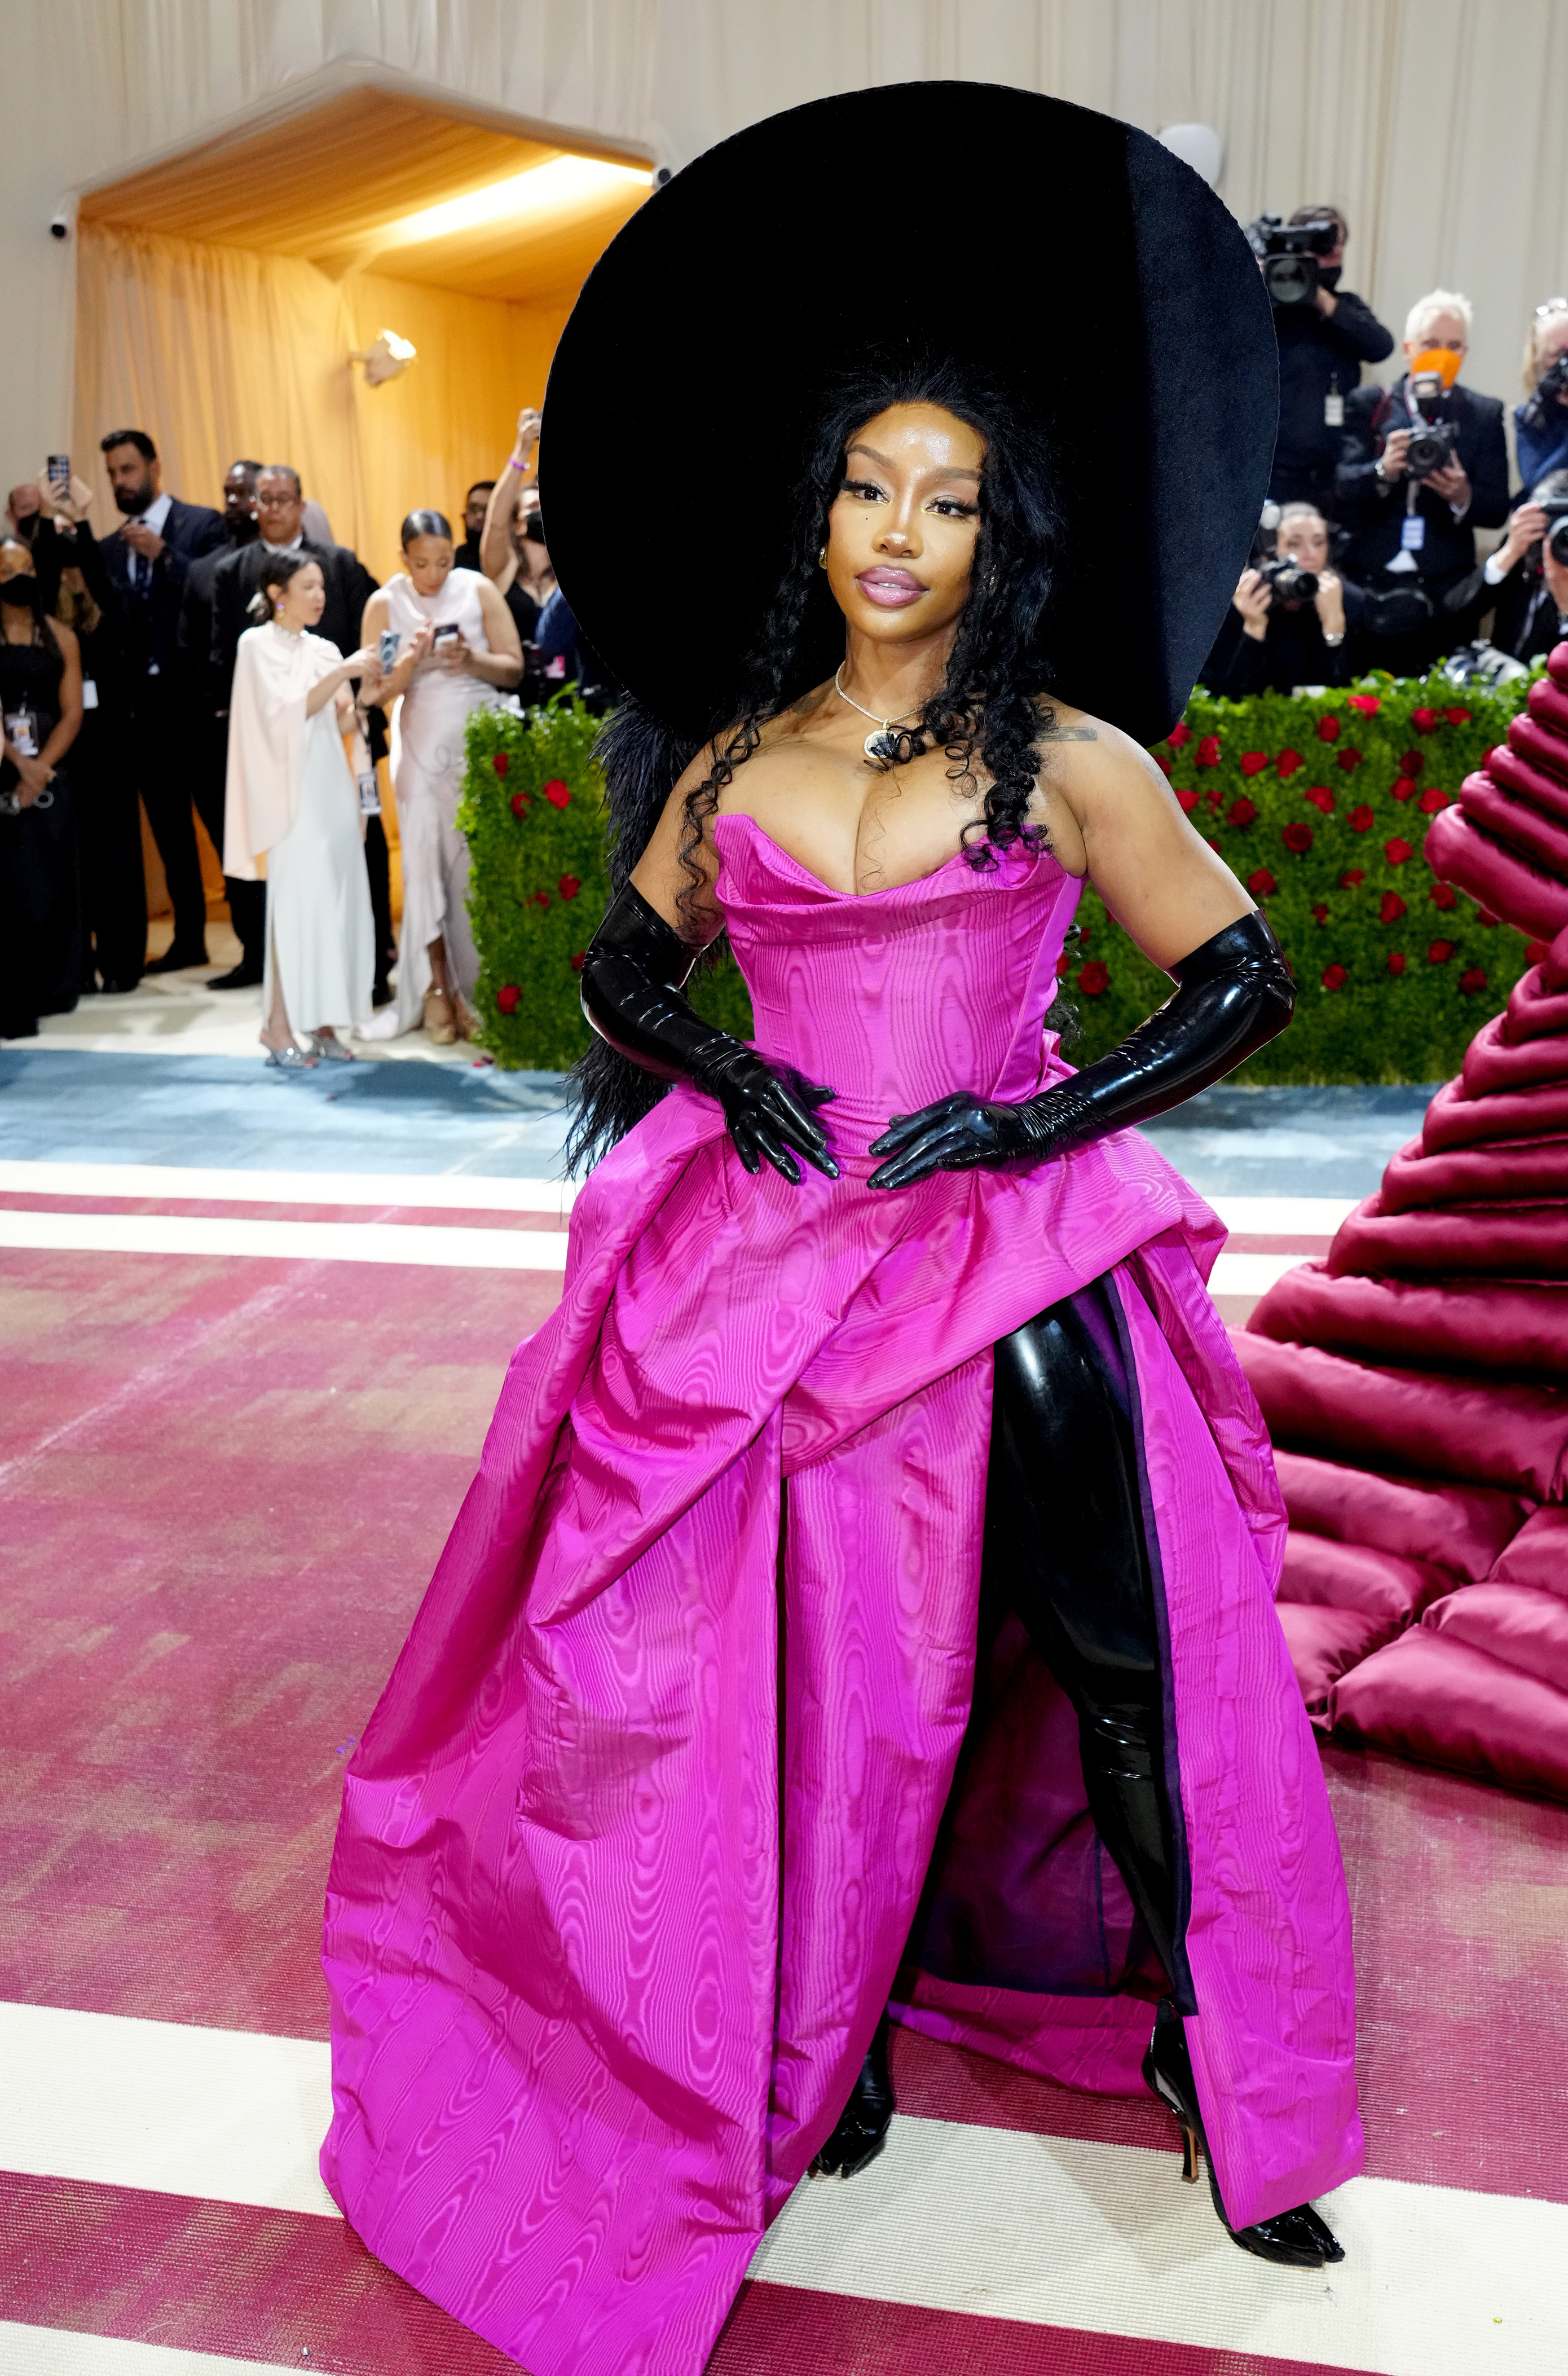 Woman in oversized black hat and pink gown with black gloves posing on stairs